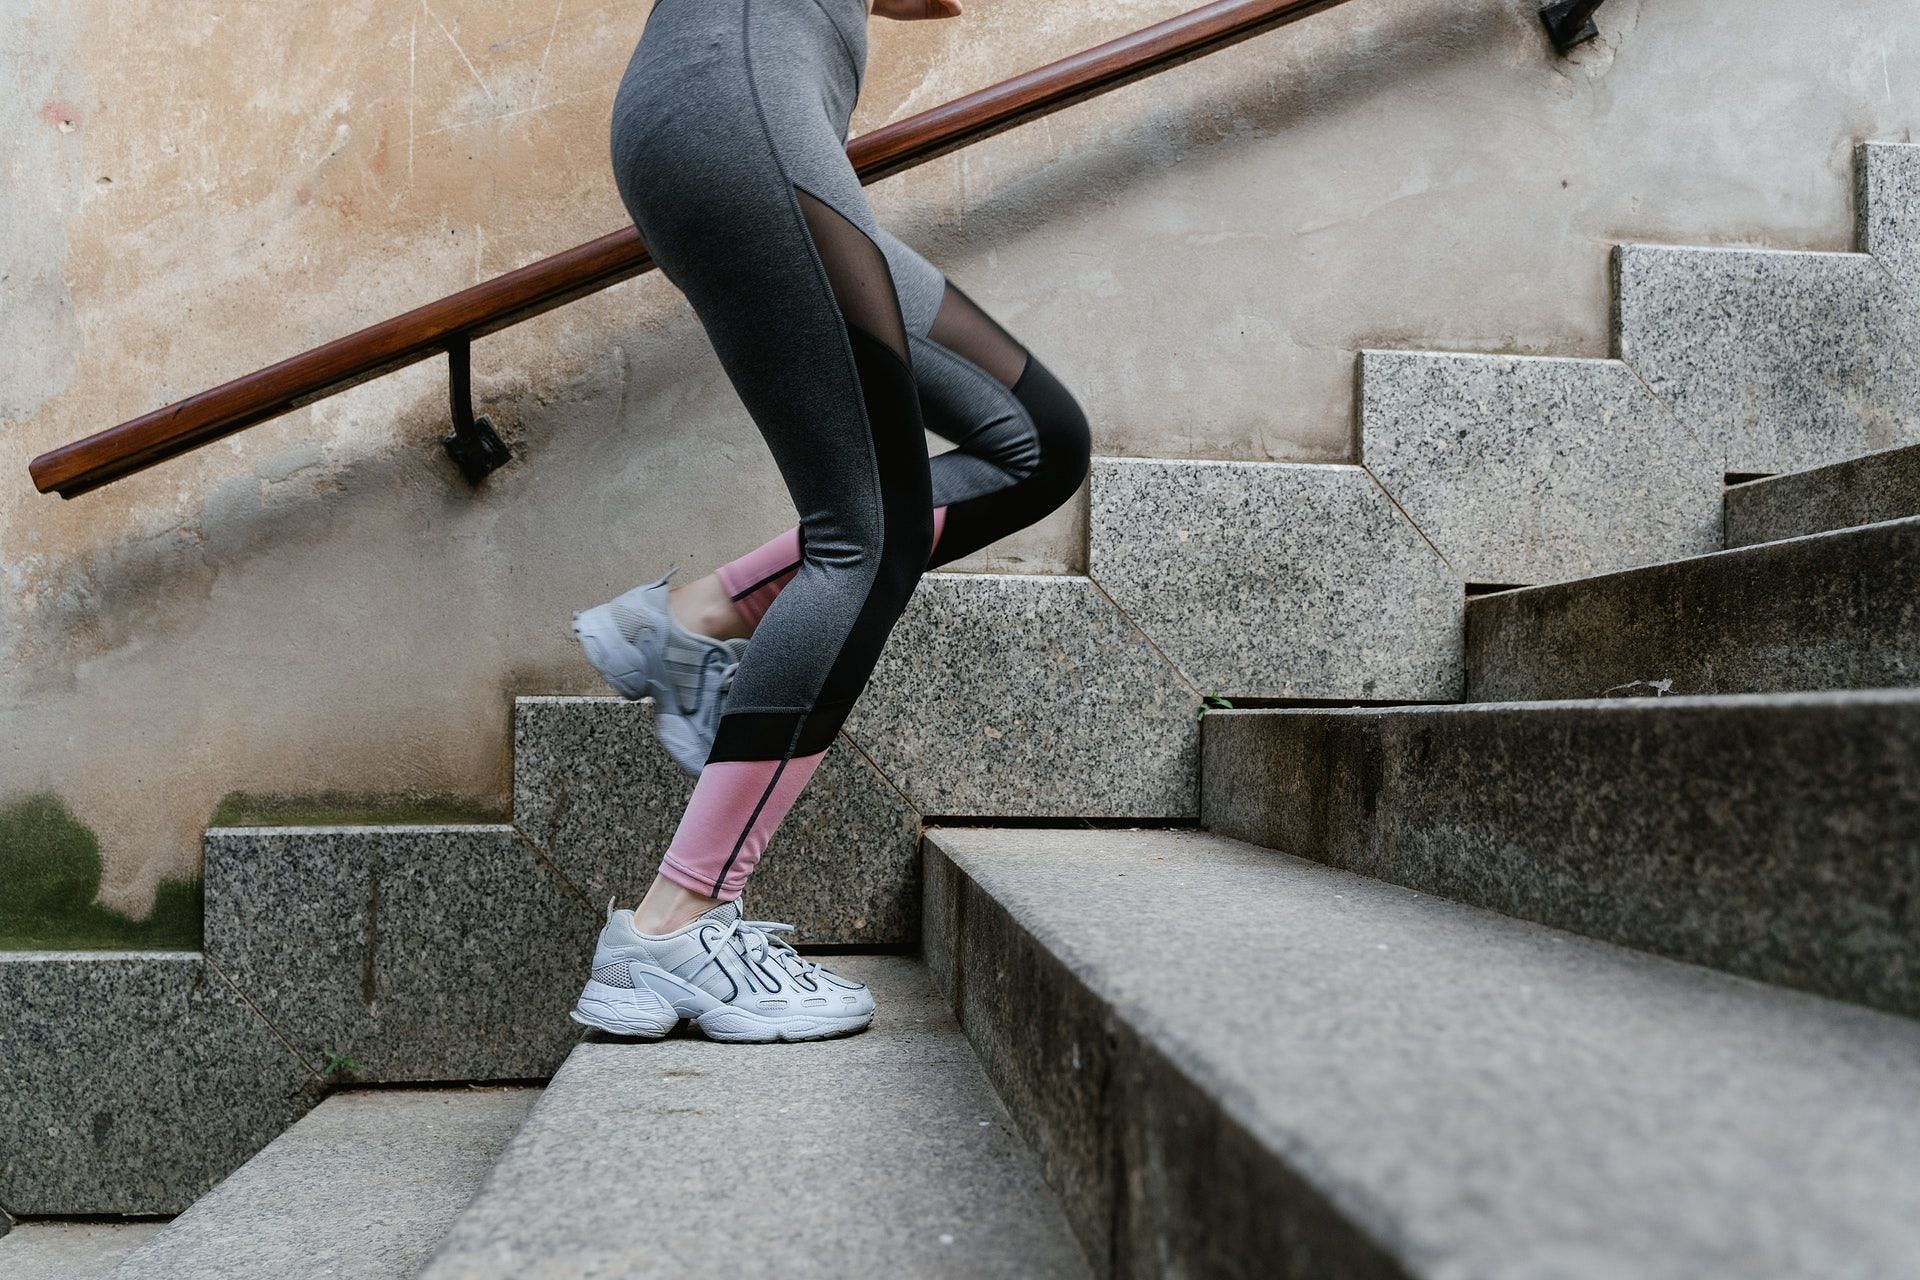 A stairmaster workout is an excellent cardio exercise.(Photo by MART PRODUCTION via pexels)